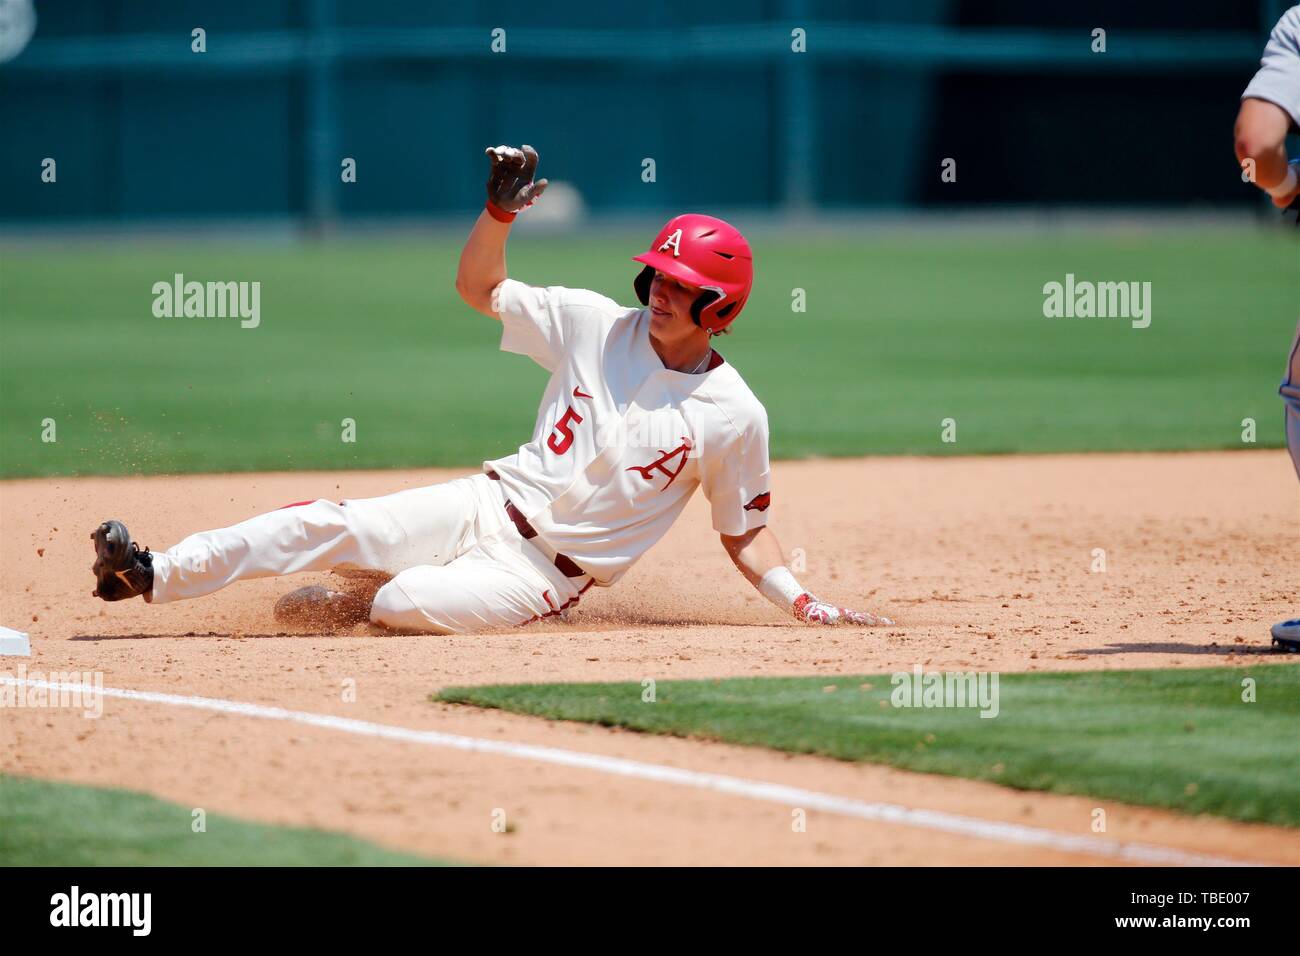 May 31, 2019: Jacob Nesbit #5 Arkansas baserunner slides safely into third base. Arkansas defeated Central Connecticut 11-5 in Fayetteville, AR, Richey Miller/CSM Stock Photo